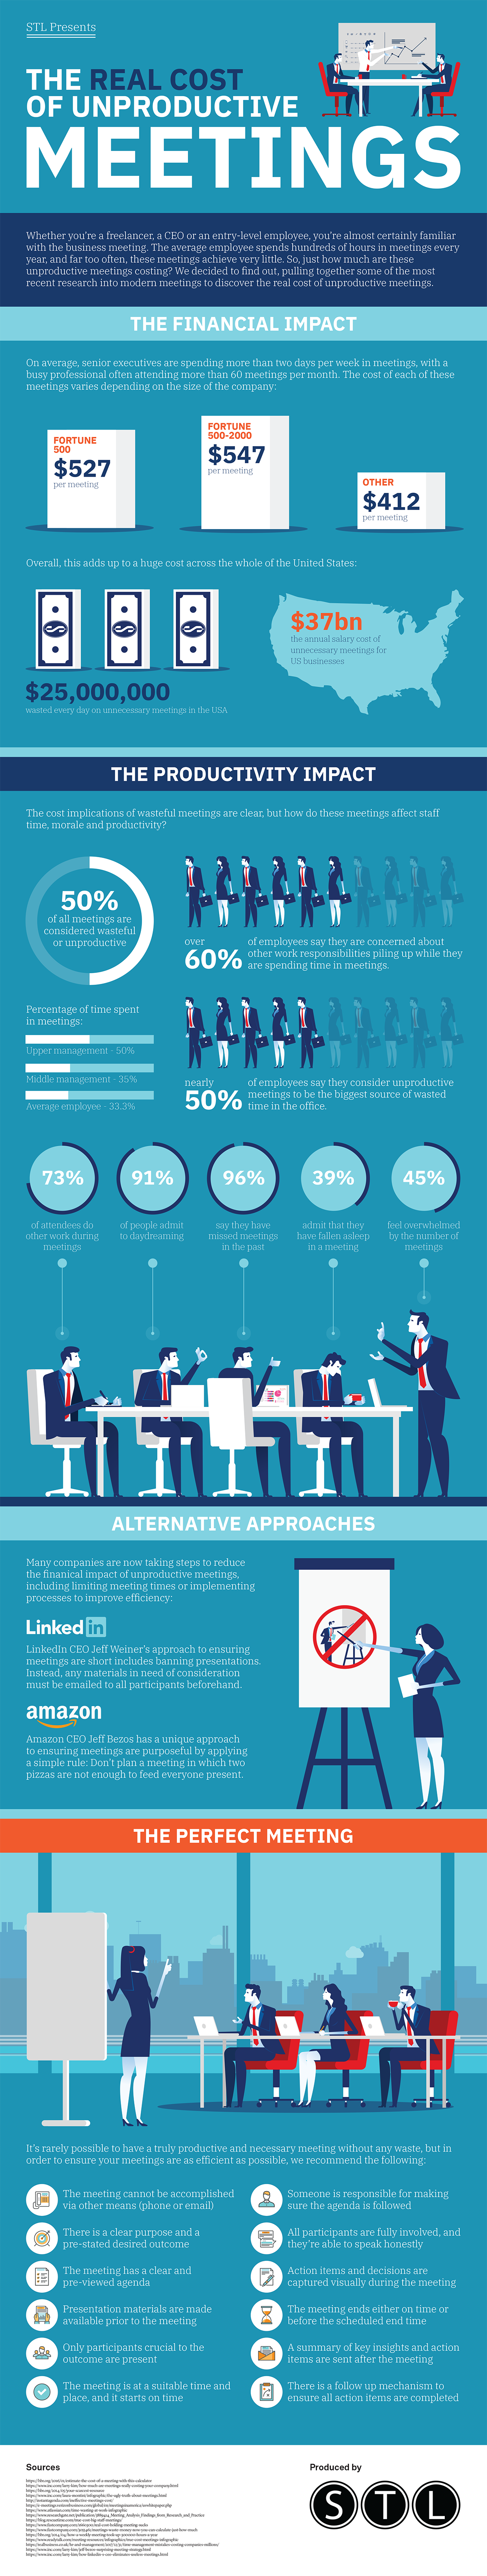 The Real Cost of Unproductive Meetings infographic